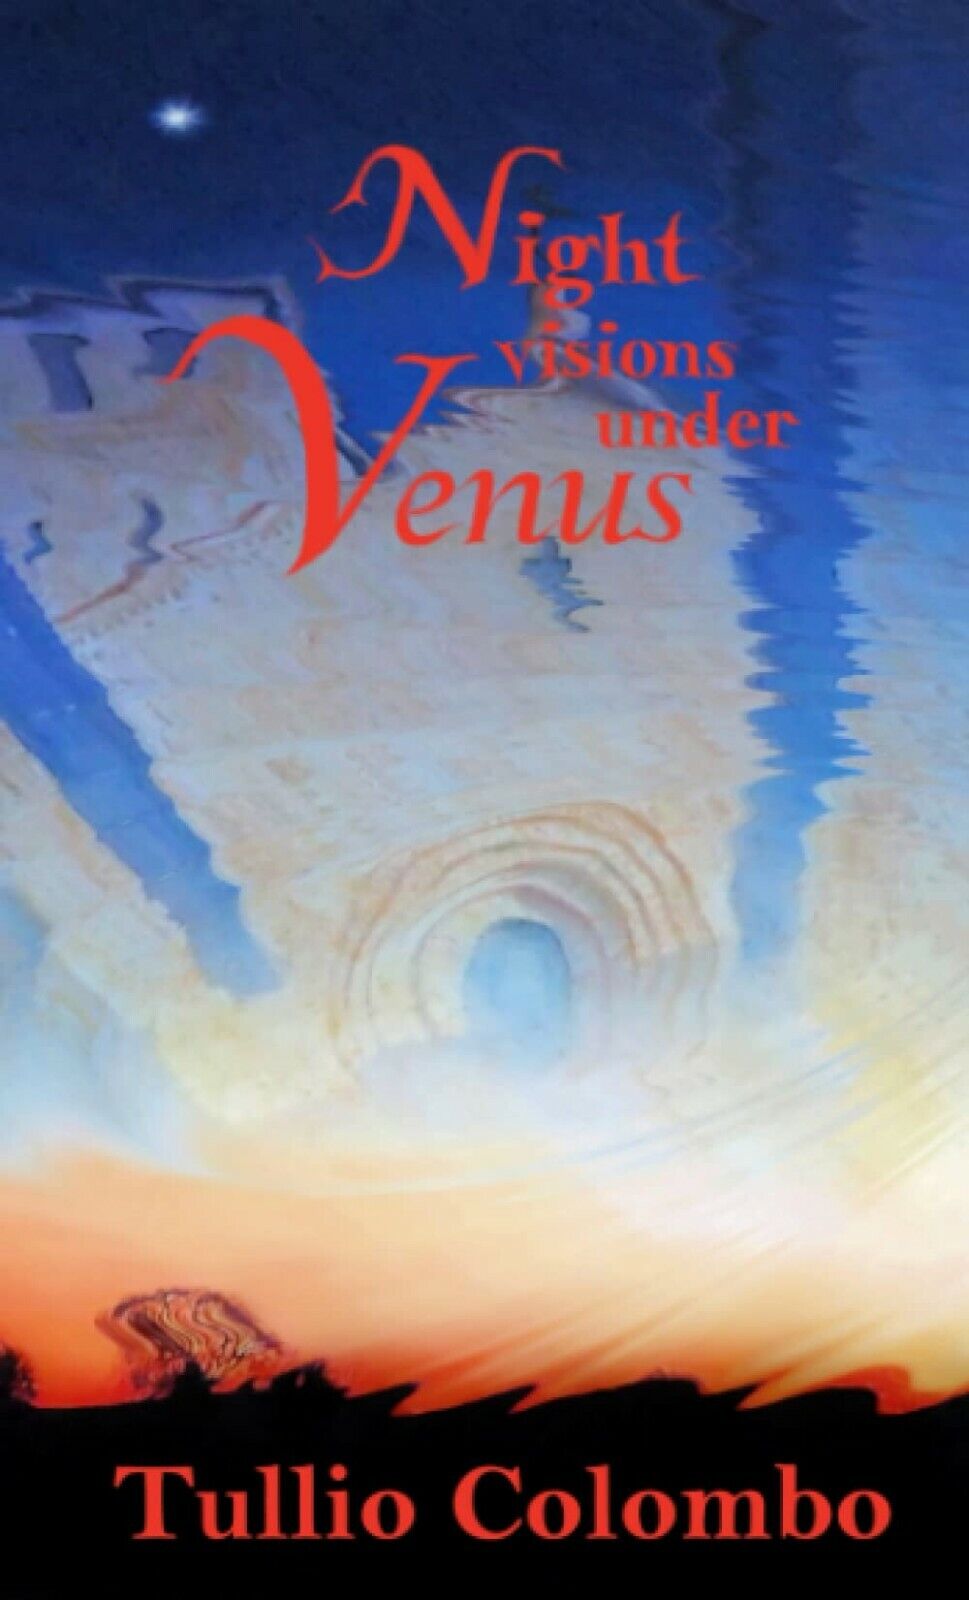 Night Visions under Venus di Tullio Colombo,  2021,  Indipendently Published